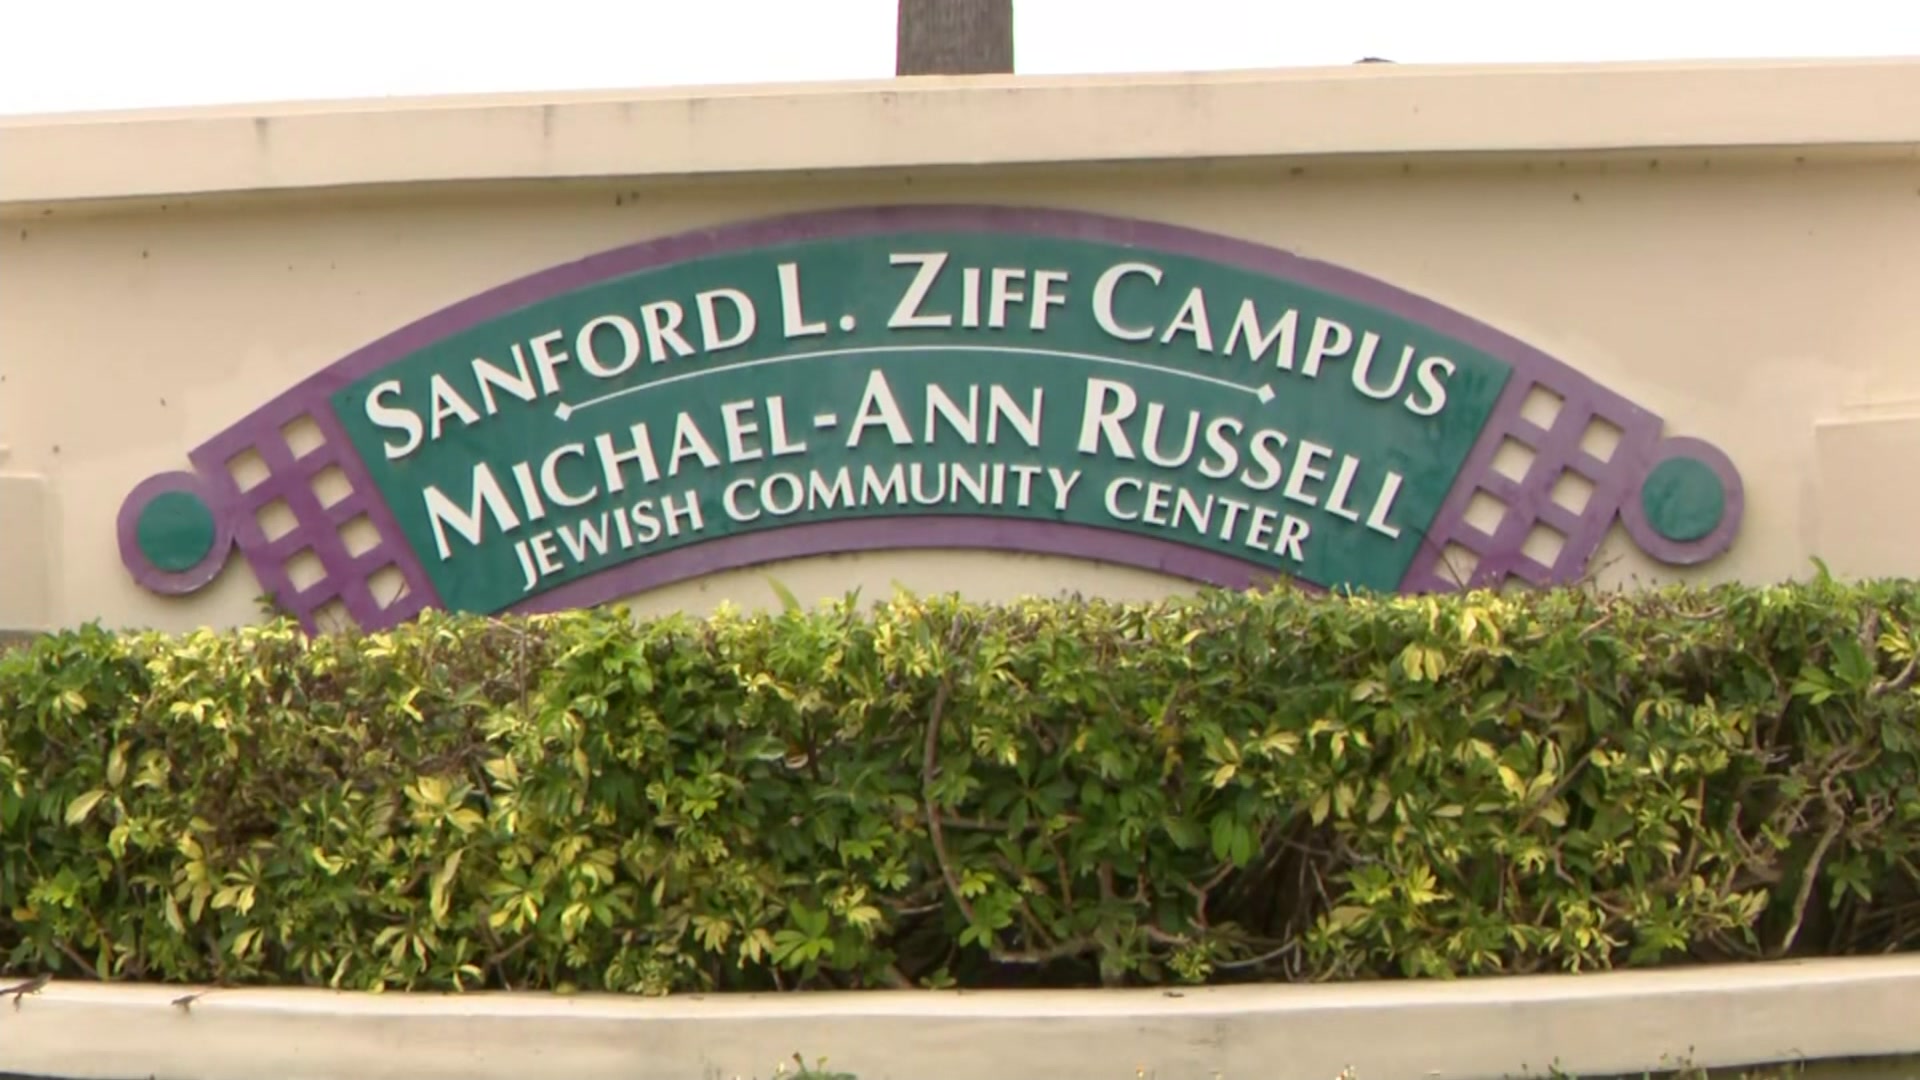 ‘Shot Her Like An Animal’: Family Devastated After Fatal Shooting At North Miami Beach Jewish Community Center